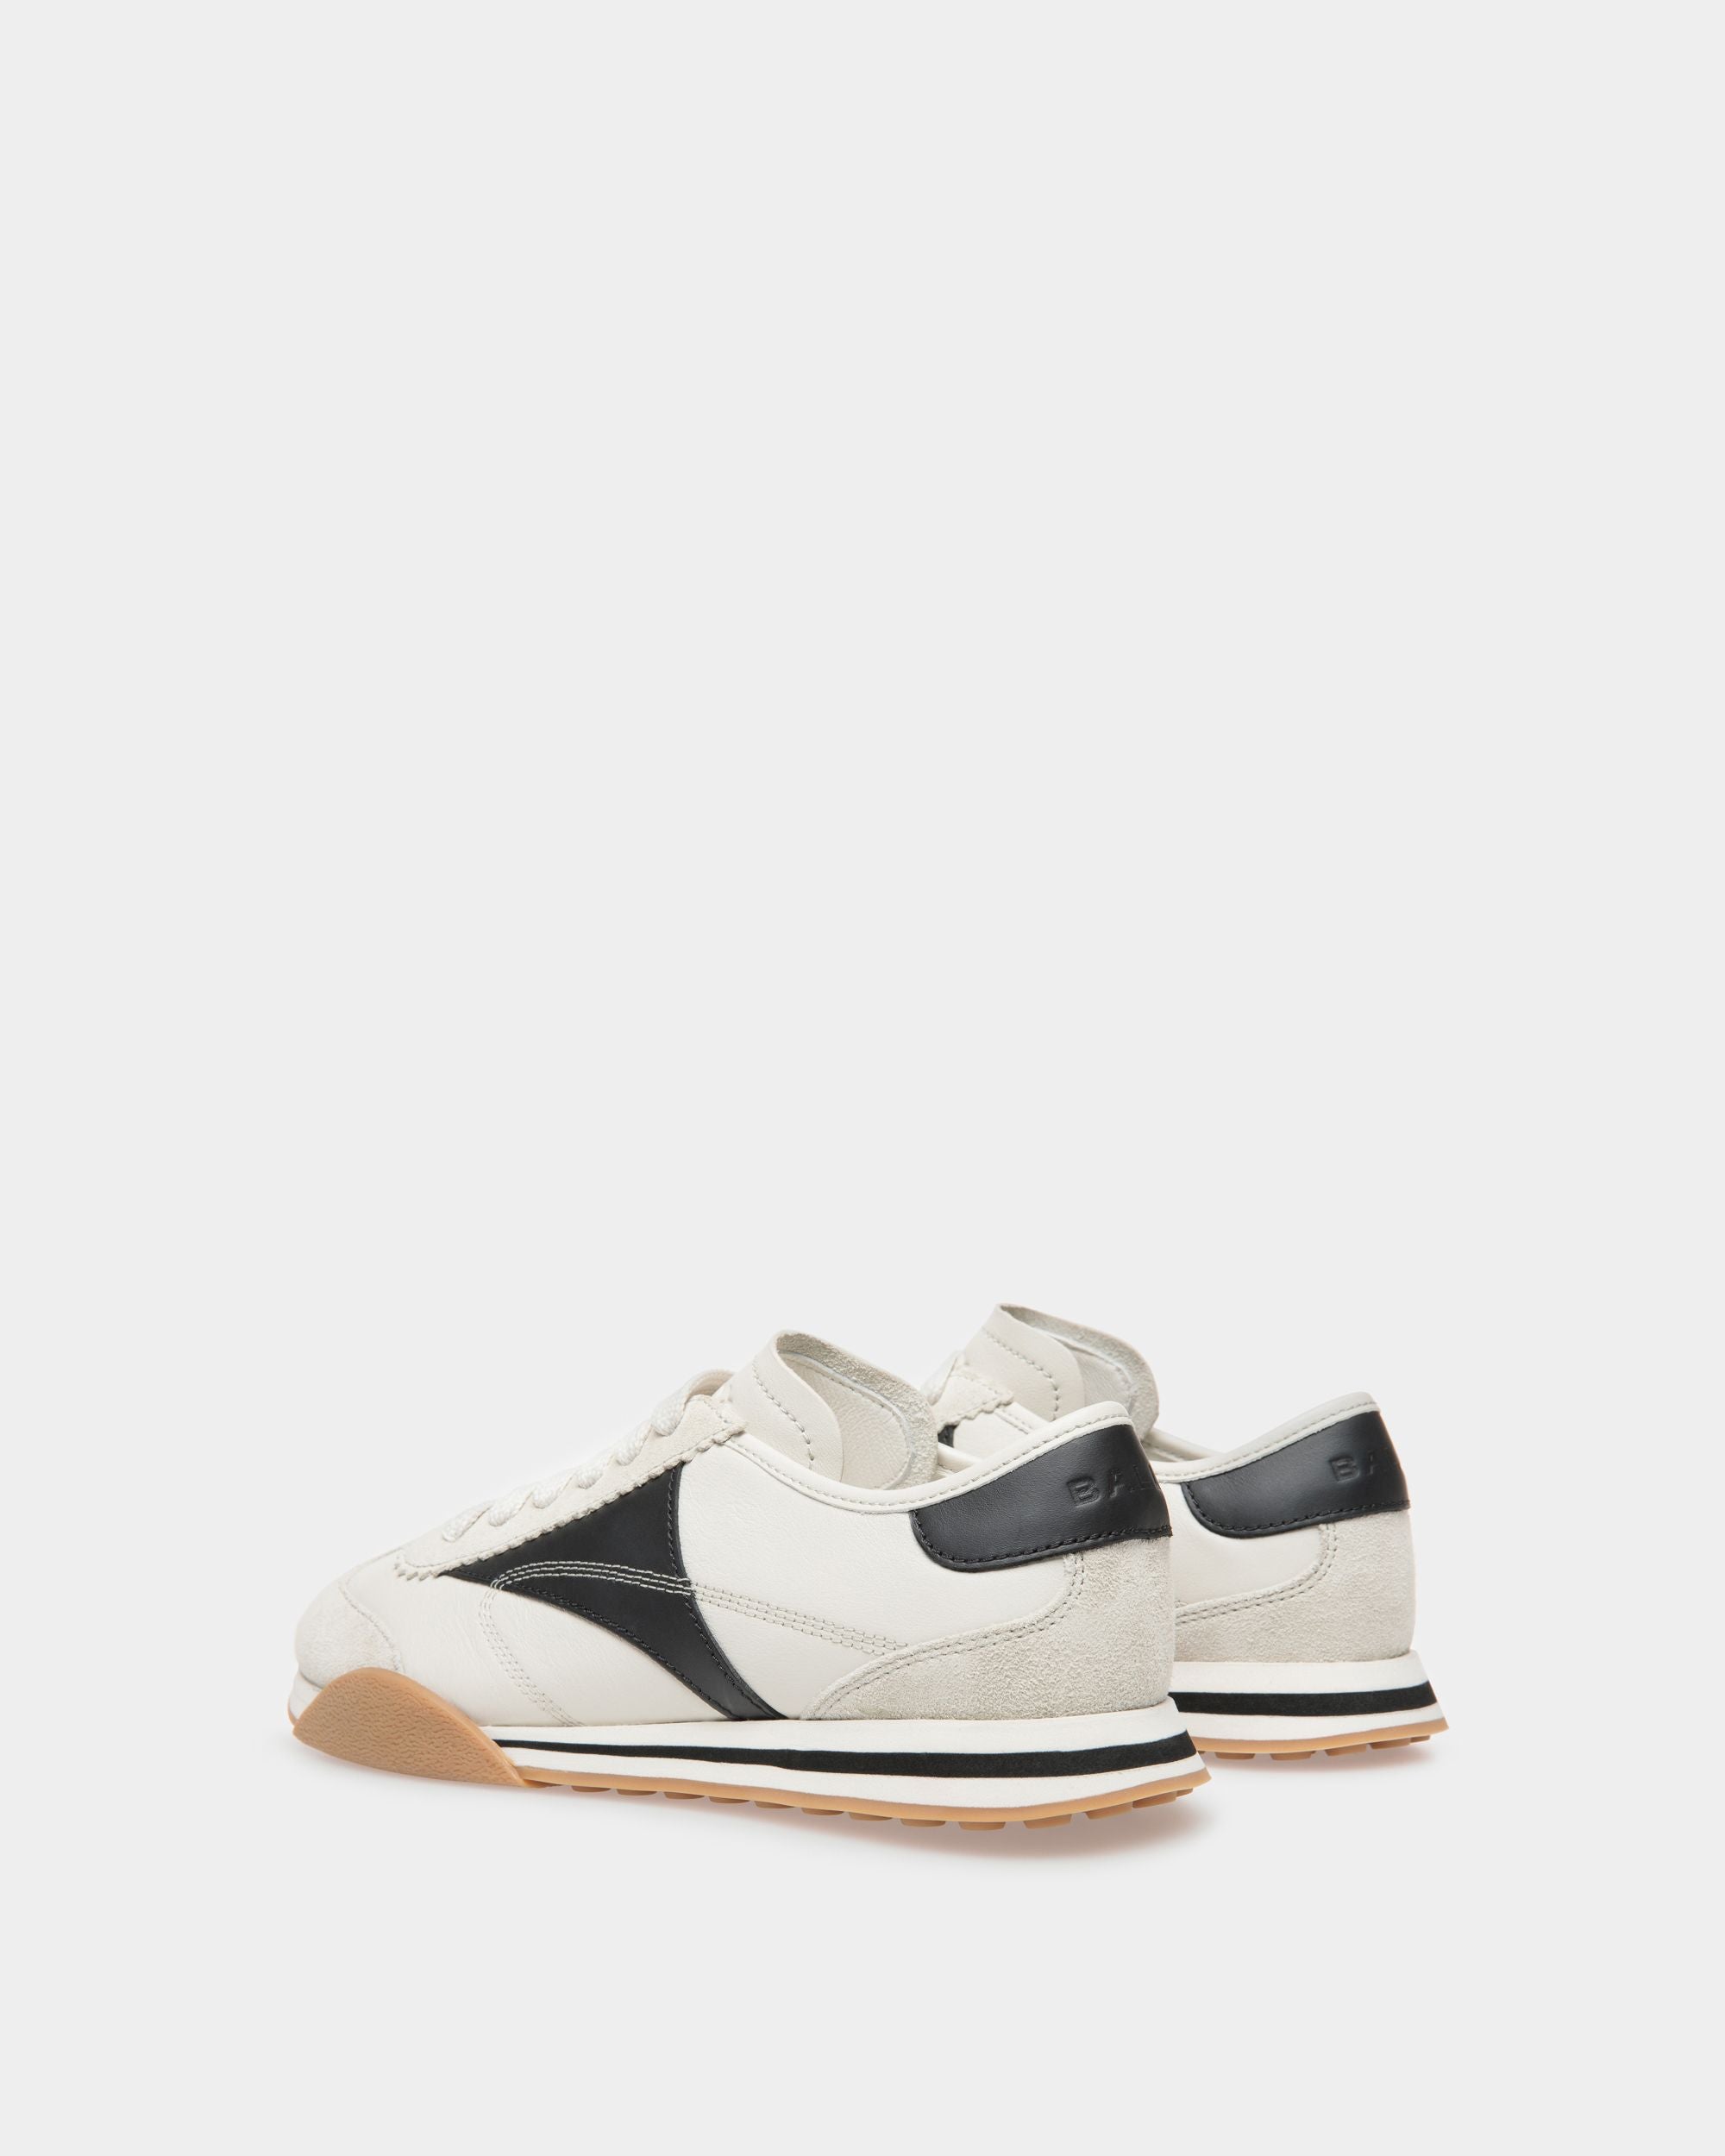 Sonney | Women's Sneakers | Dusty White And Black Leather | Bally | Still Life 3/4 Back